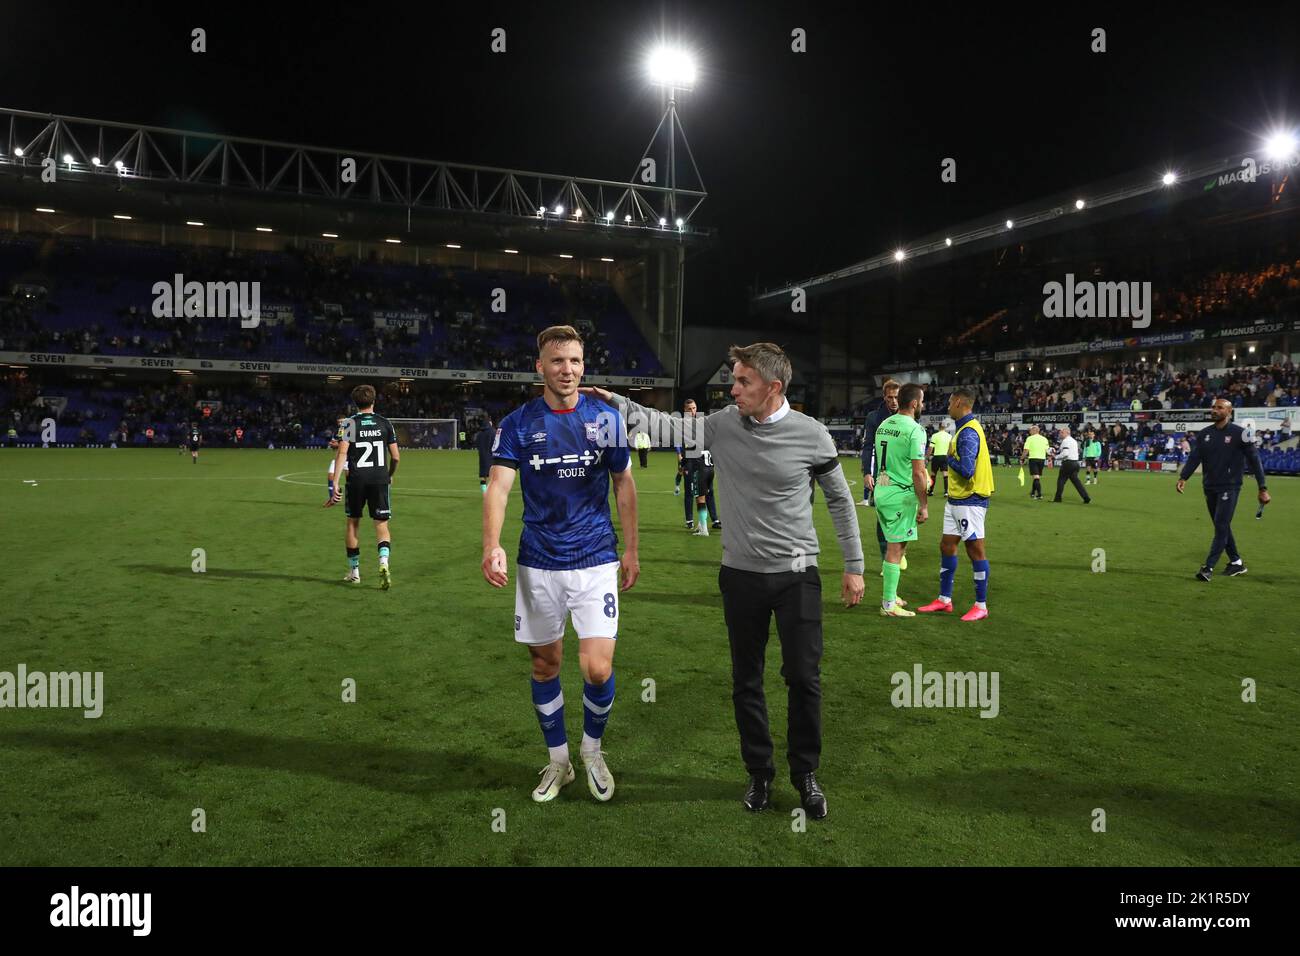 Manager of Ipswich Town, Kieran McKenna and Lee Evans of Ipswich Town are seen at full time - Ipswich Town v Bristol Rovers, Sky Bet League One, Portman Road, Ipswich, UK - 13th September 2022  Editorial Use Only - DataCo restrictions apply Stock Photo